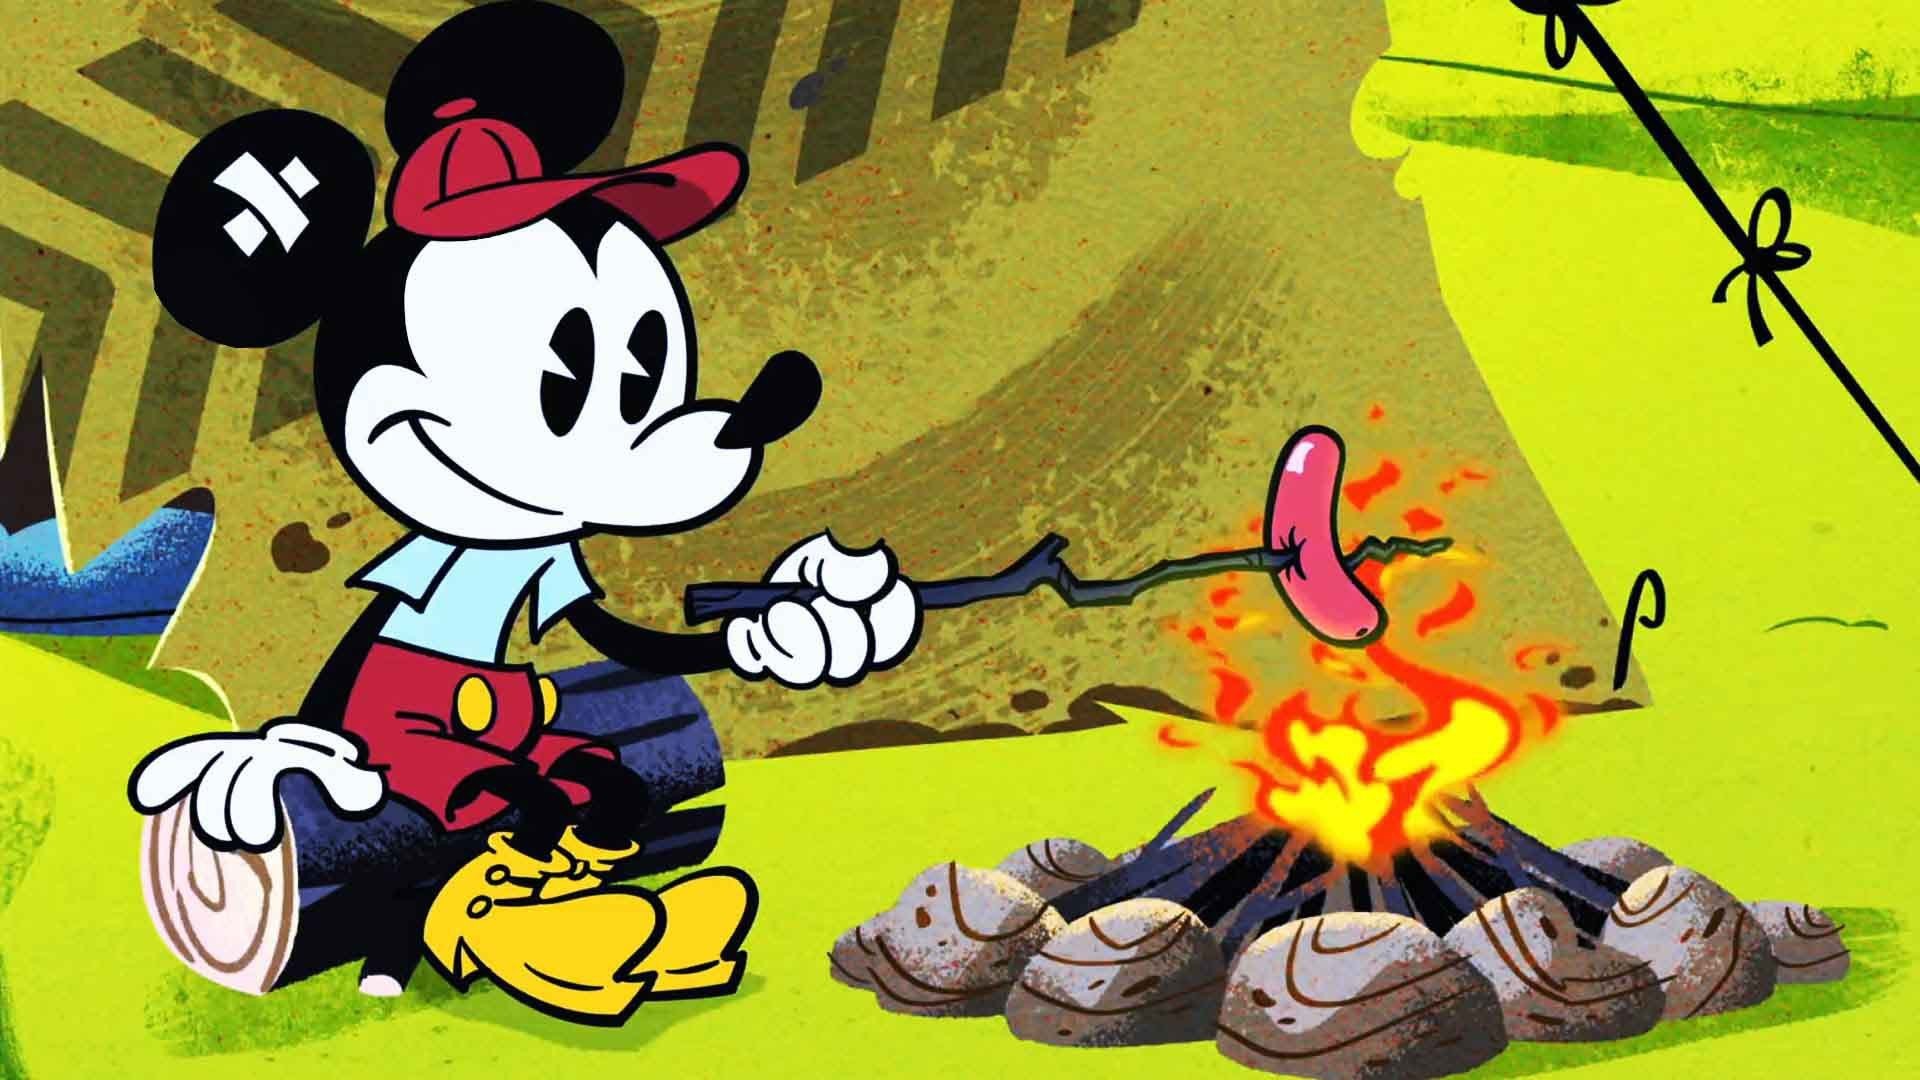 1920x1080 Free-download-mickey-mouse-image--kB-wallpaper-